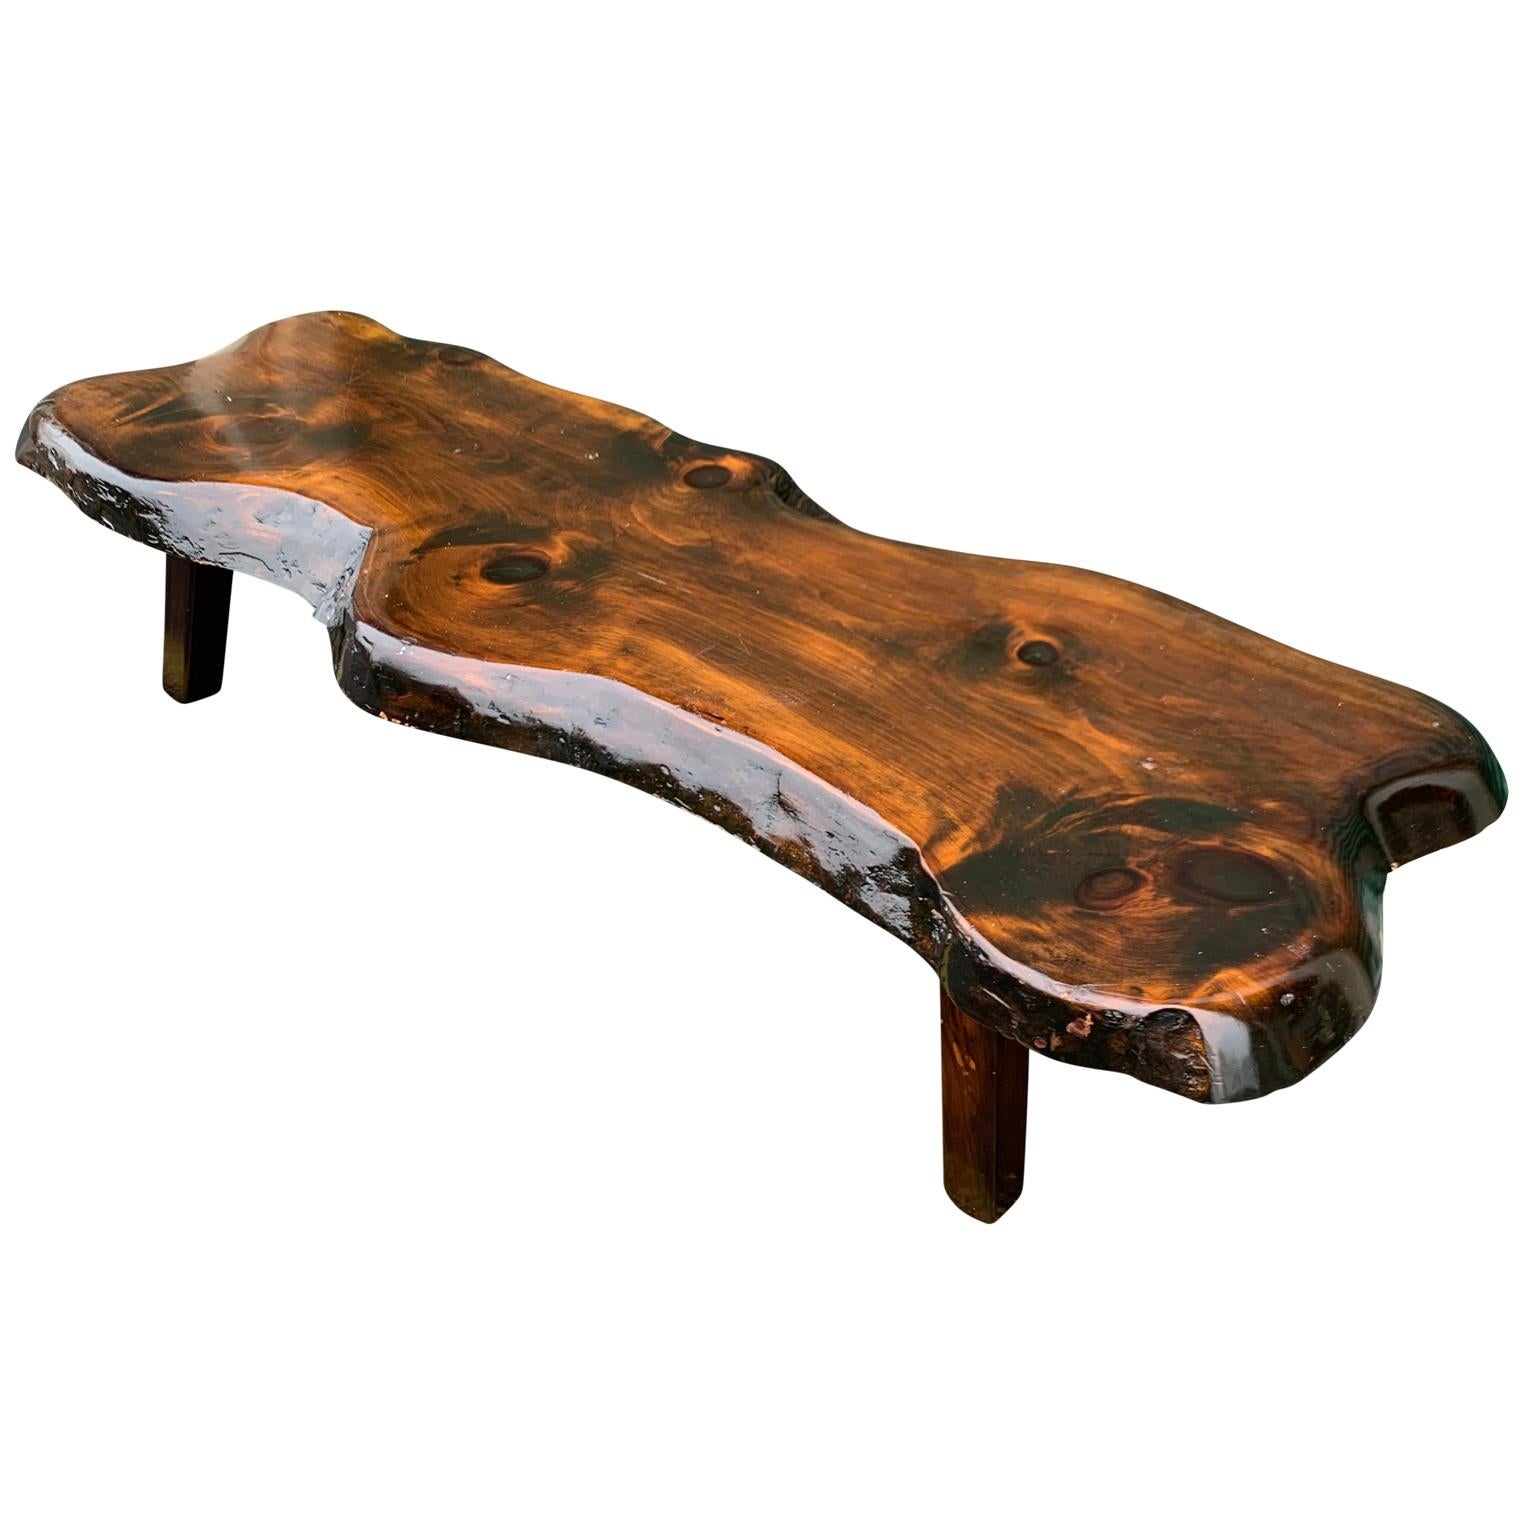 Rustic Large Wooden Folk Art Bench Or Cocktail Table For Sale